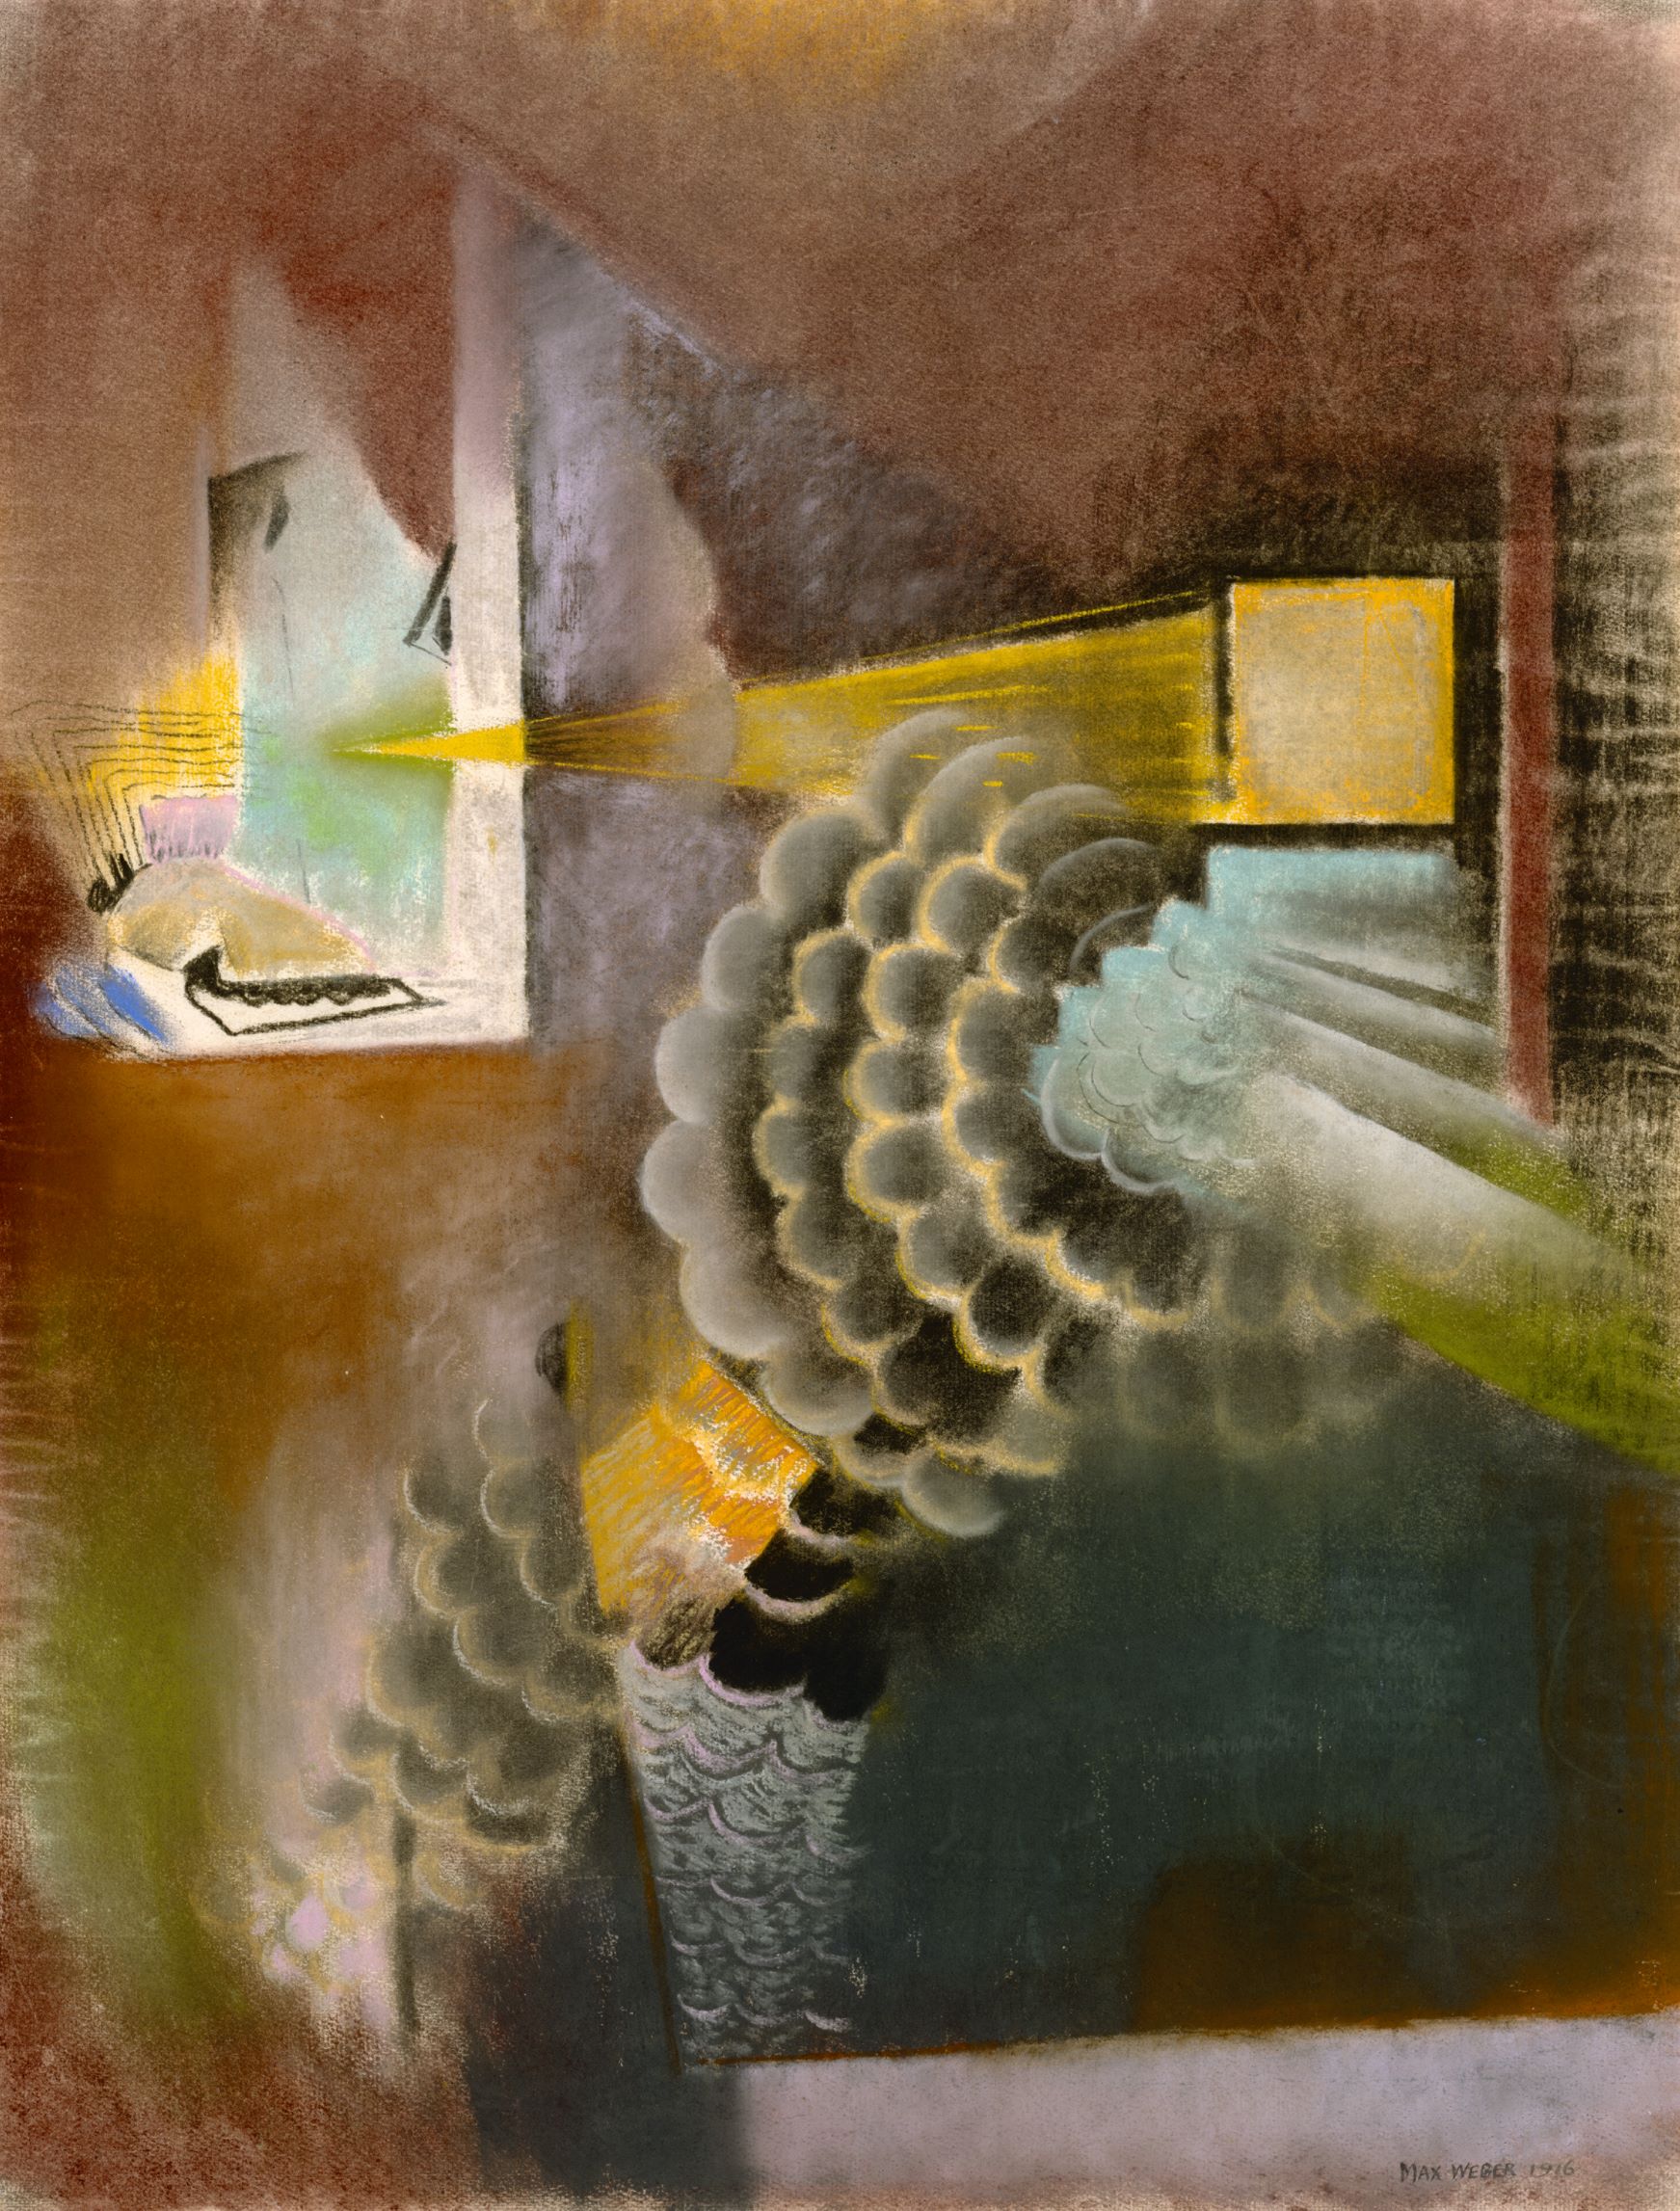 Max Weber, Slide Lecture at the Metropolitan Museum, 1916, pastel on paper. From the pastel entry in Art =